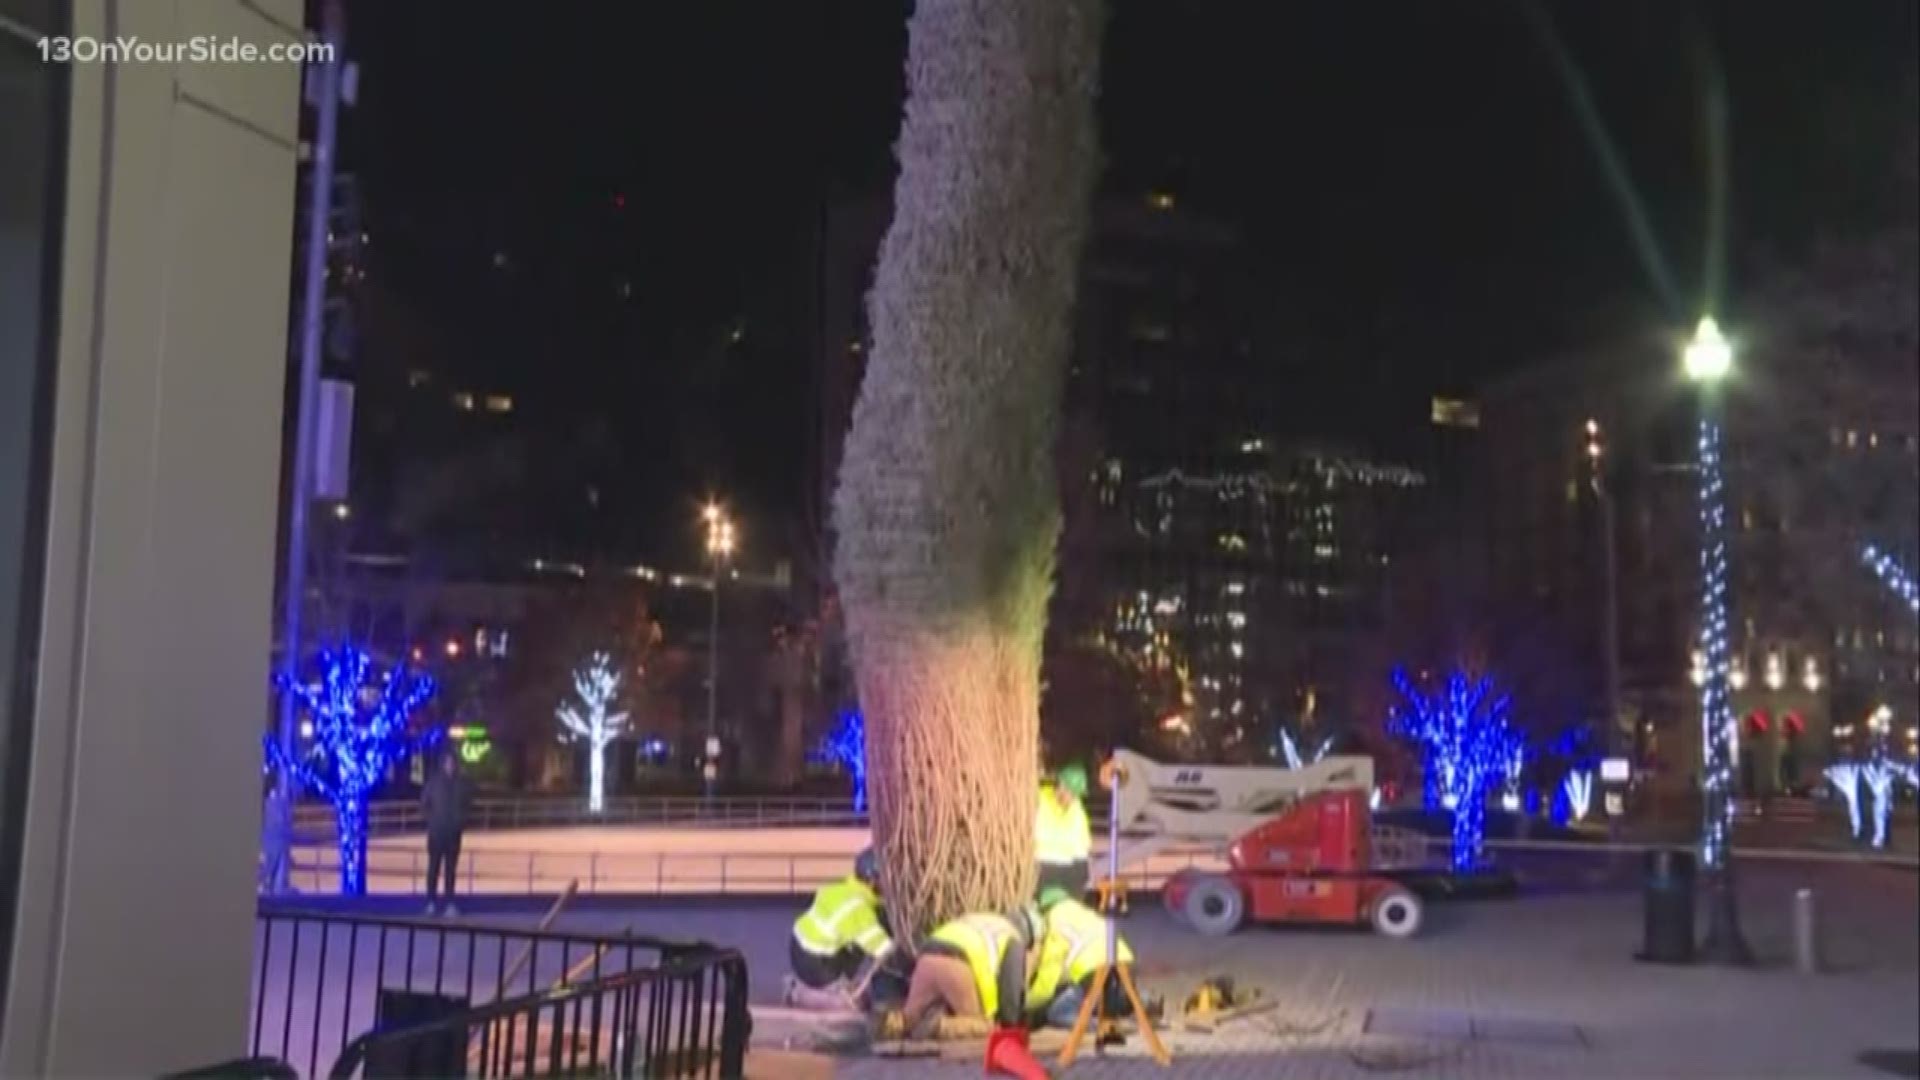 The 41-foot Christmas tree was installed at Rosa Parks Circle early Tuesday morning.